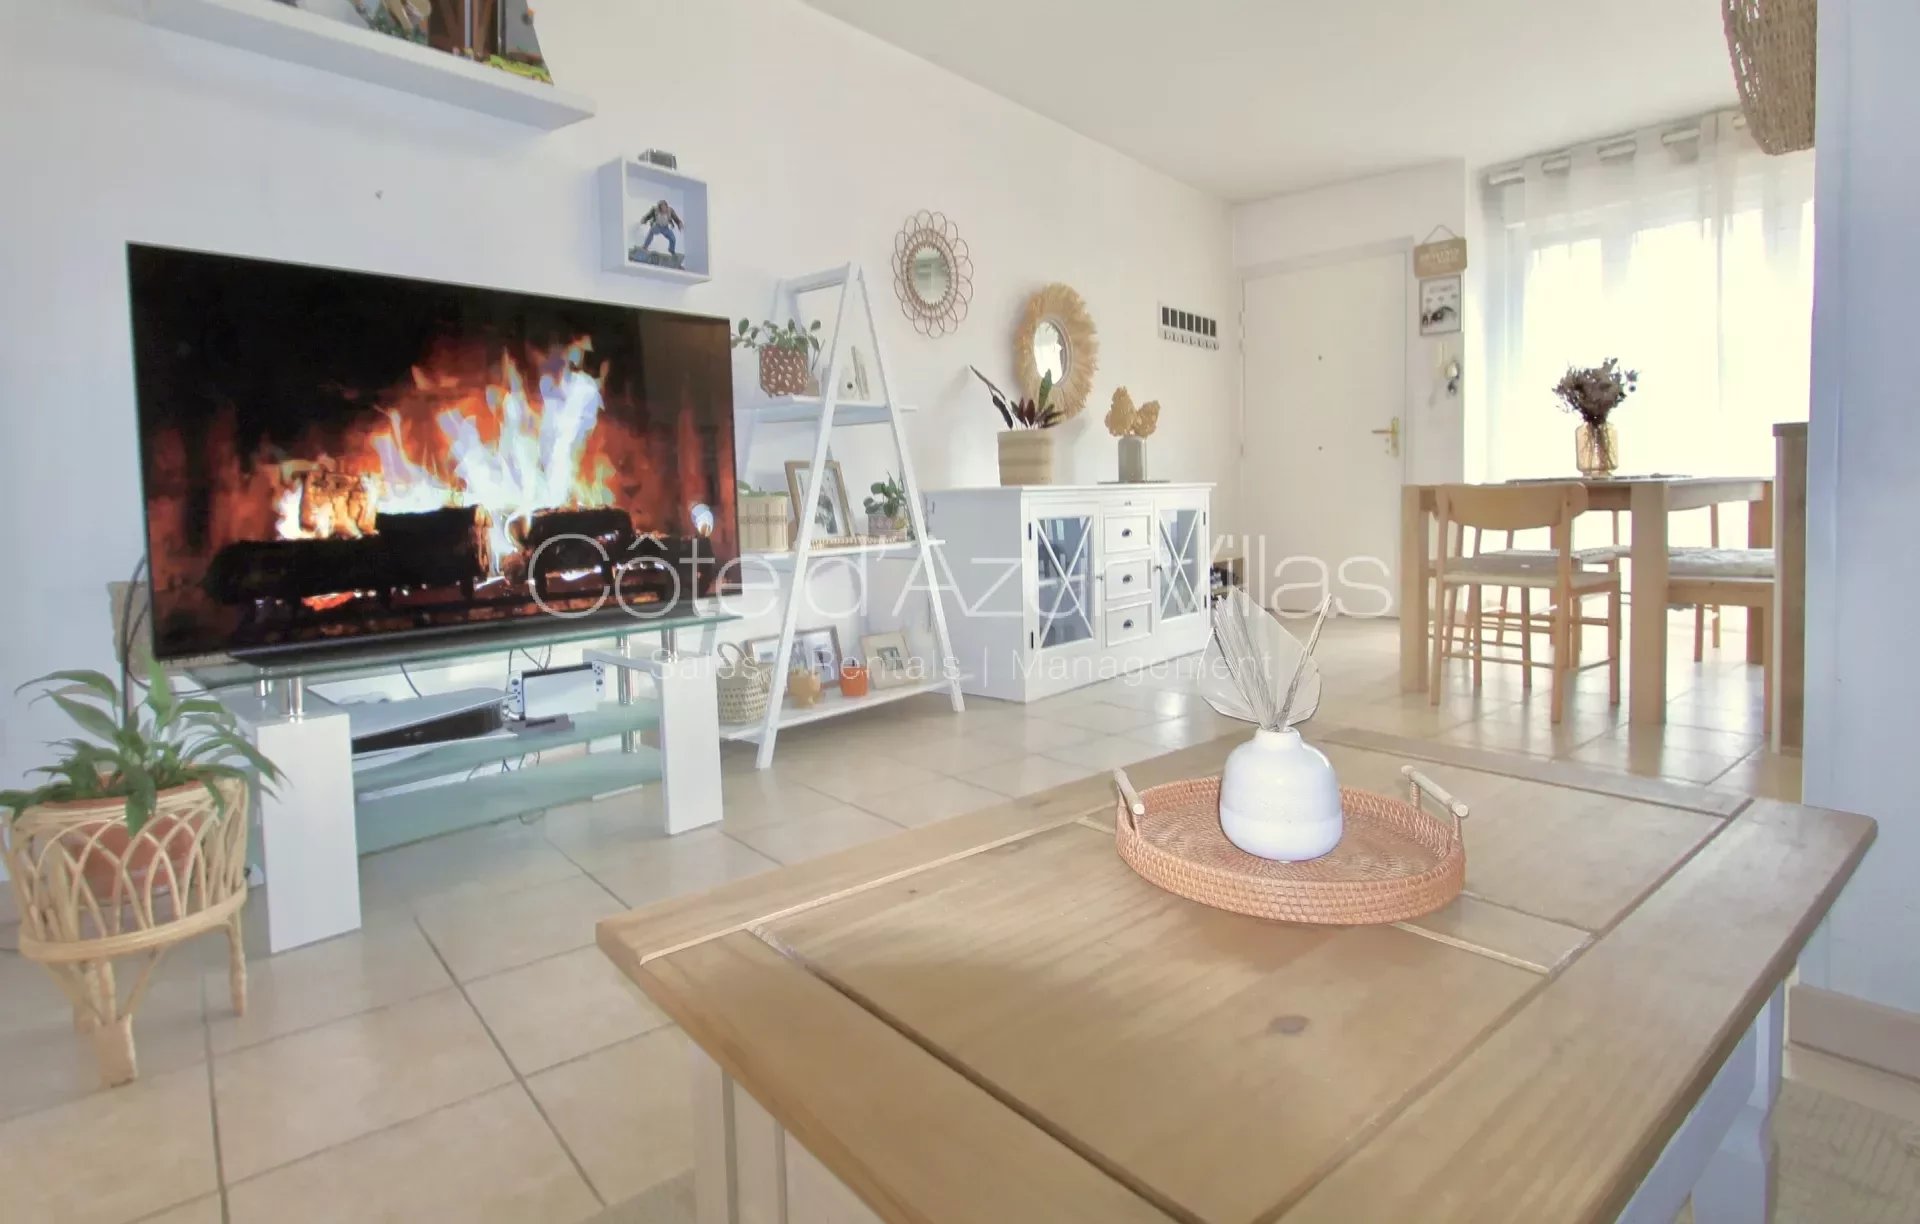 St Laurent du Var - 1 bedroom Apt ideally situated, with 2 terraces